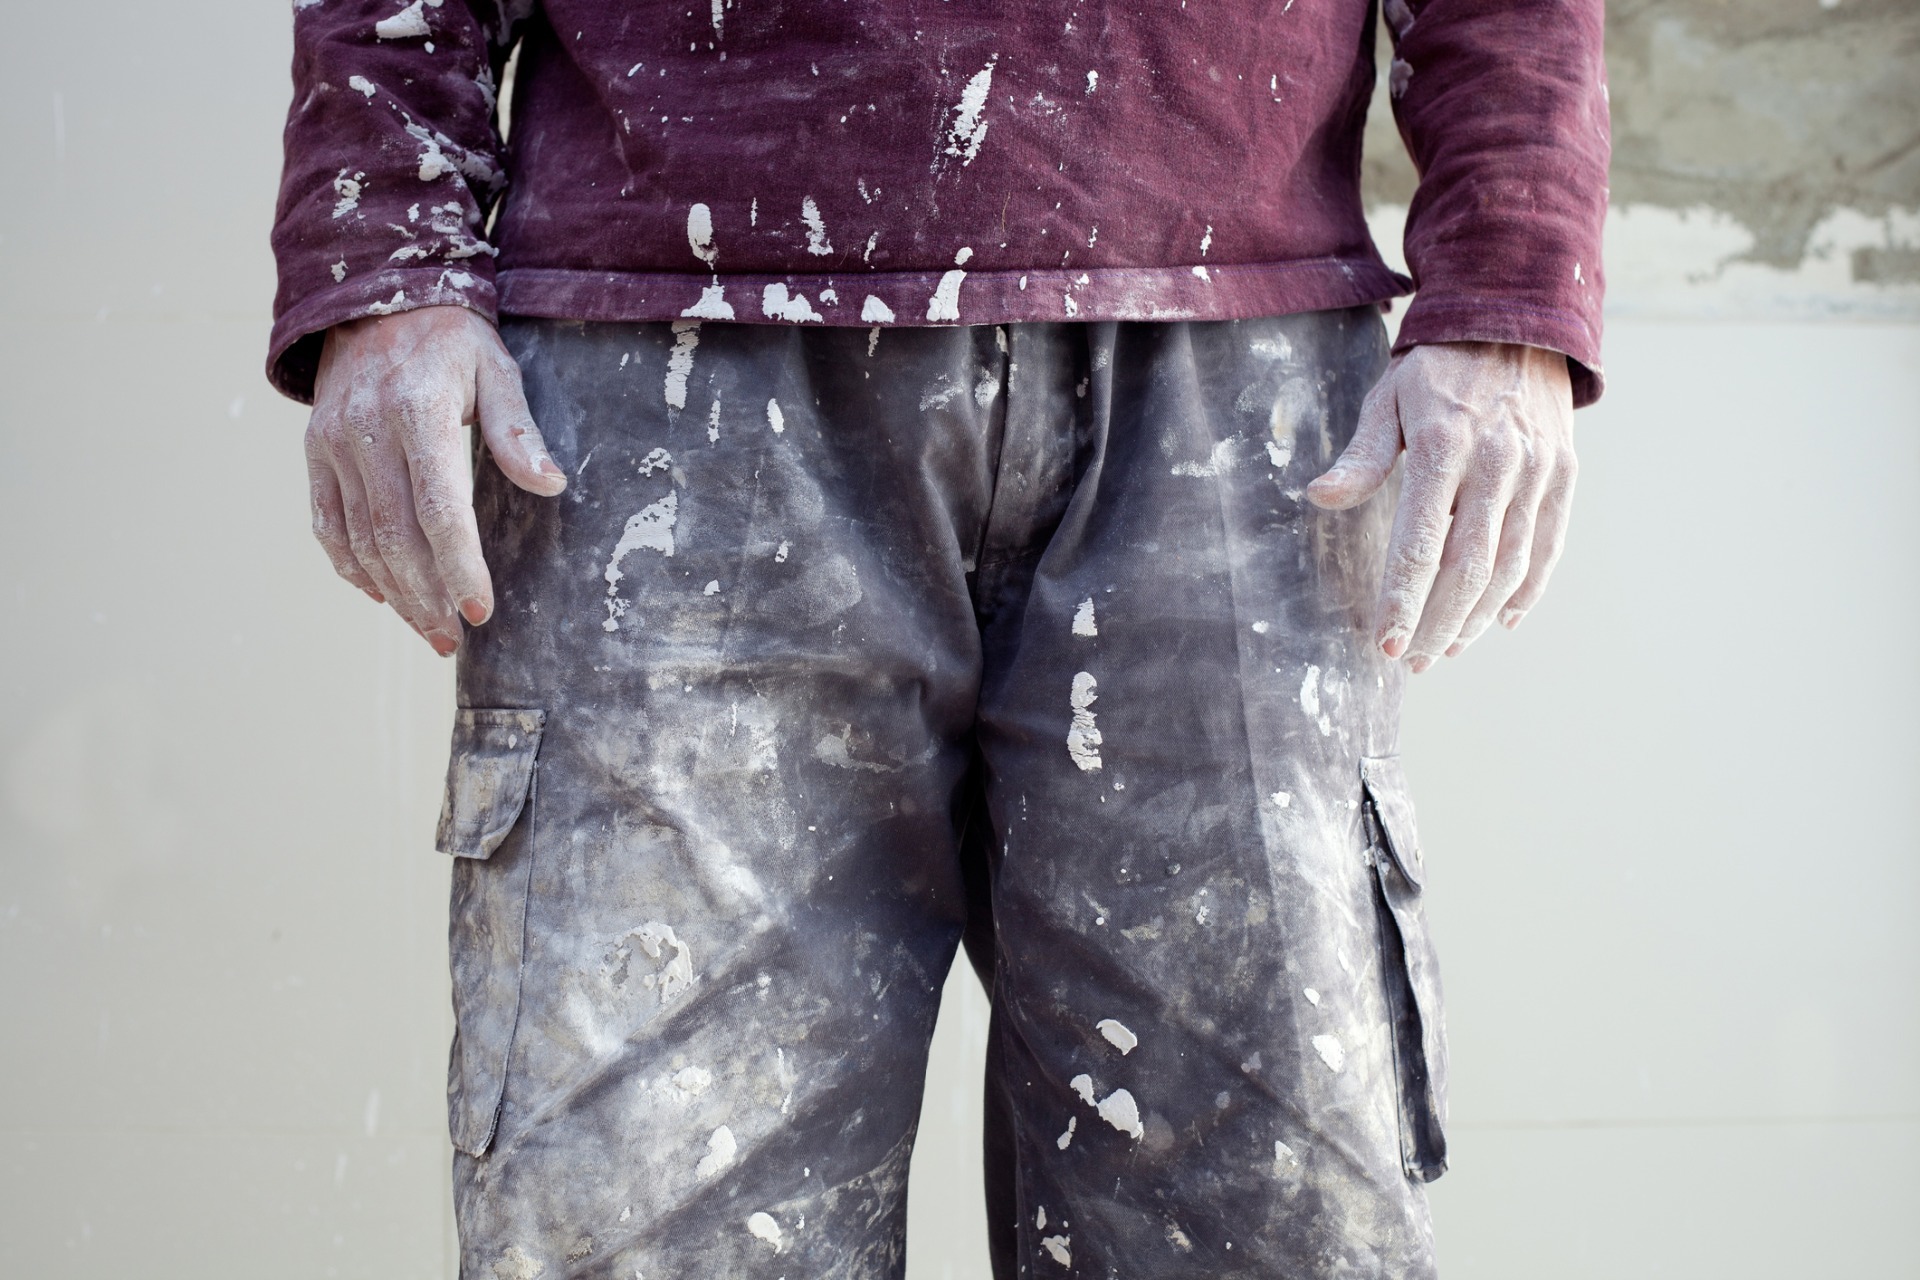 Plastering Dude and Trousers